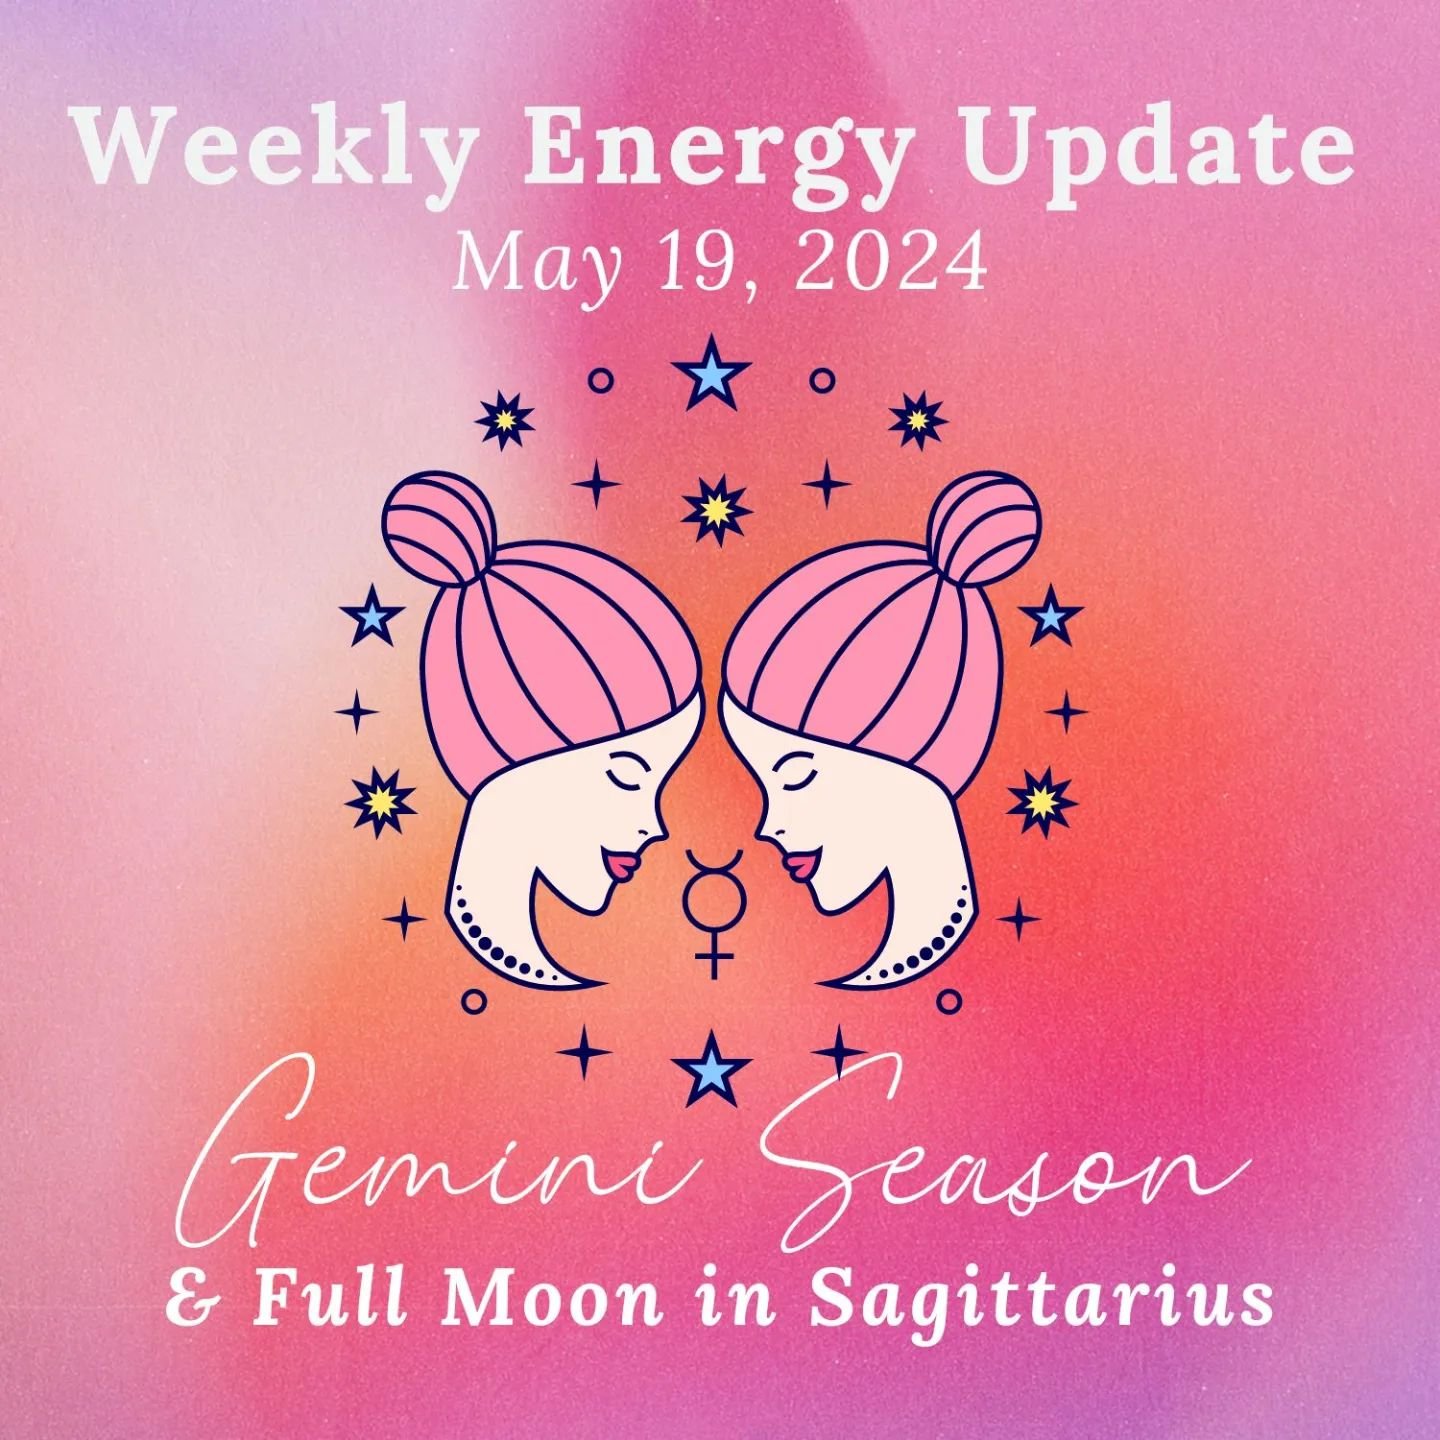 The Weekly Energy Update Podcast is up!&nbsp;✨

Gemini Season begins on Monday. This Gemini season kicks off with Jupiter in exact conjunction with the sun. This is known as a Cazimi. Jupiter, the planet of abundance, gifts, and luck, is amplified by